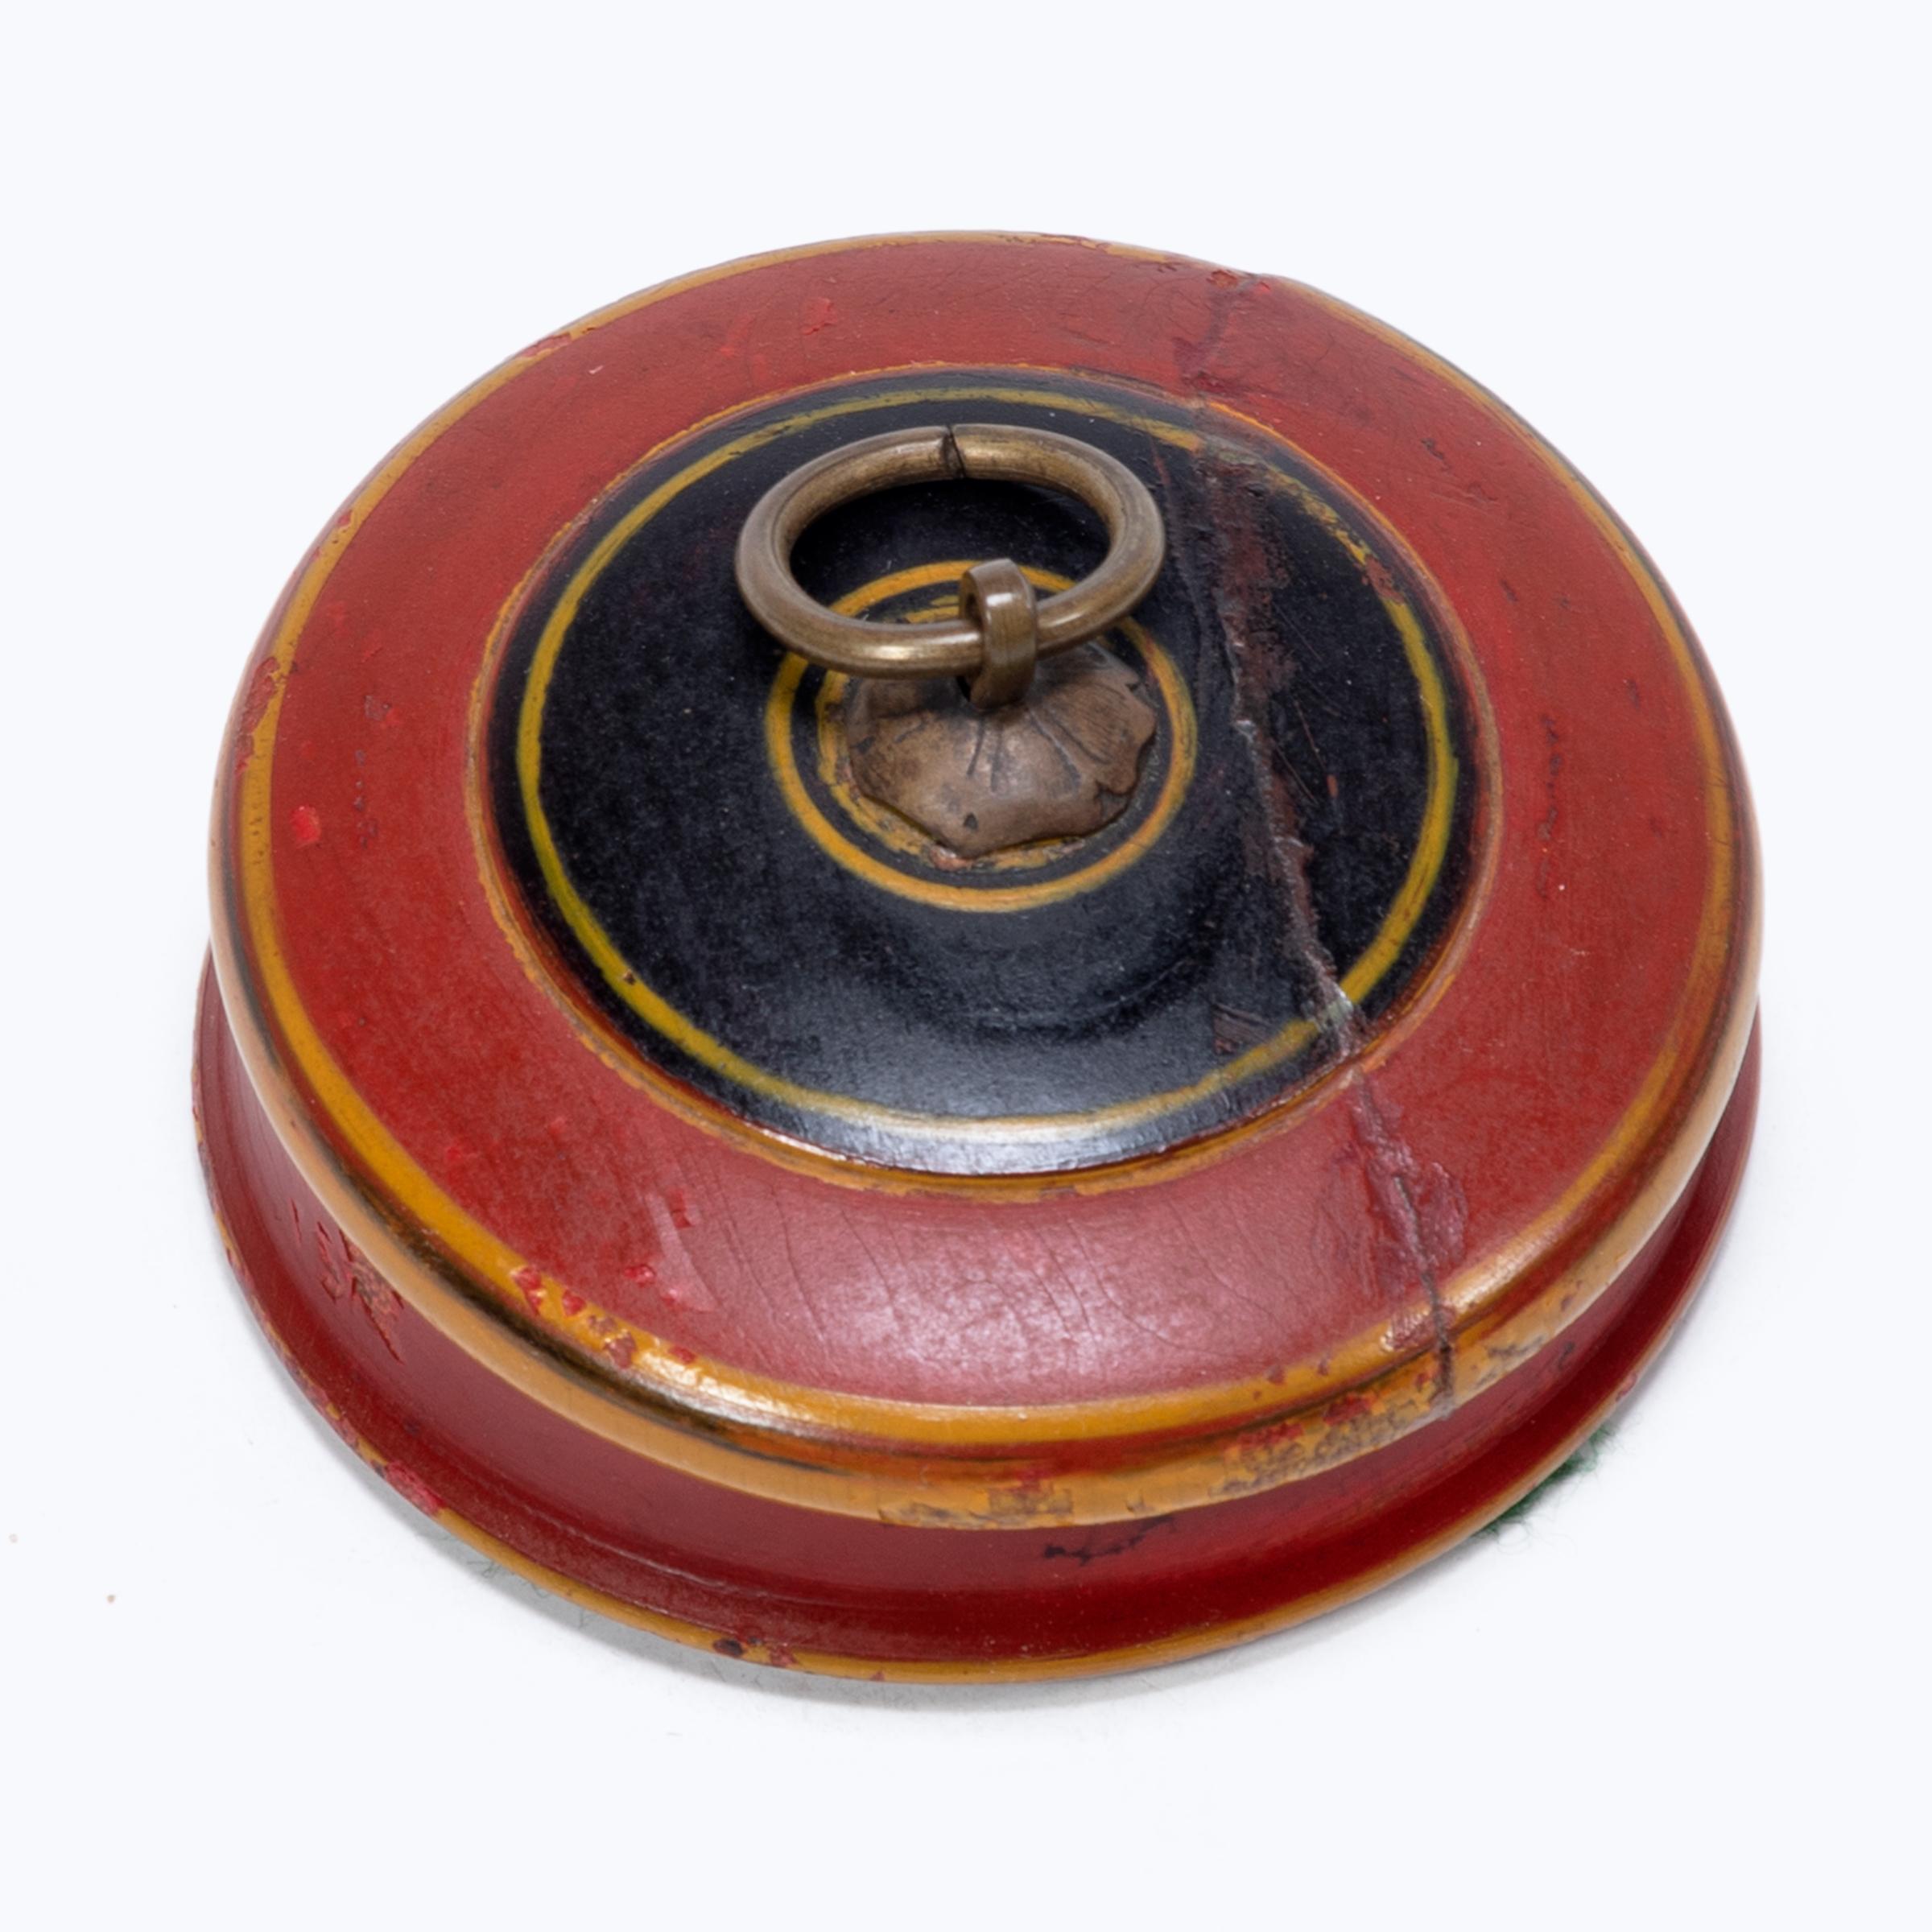 In many southeast Asian cultures, offering guests a betel quid to chew was the fundamental symbol of hospitality. A blend of leaves, nuts, seasonings, and sometimes tobacco, betel was kept in finely worked and decorated boxes. This round betel box